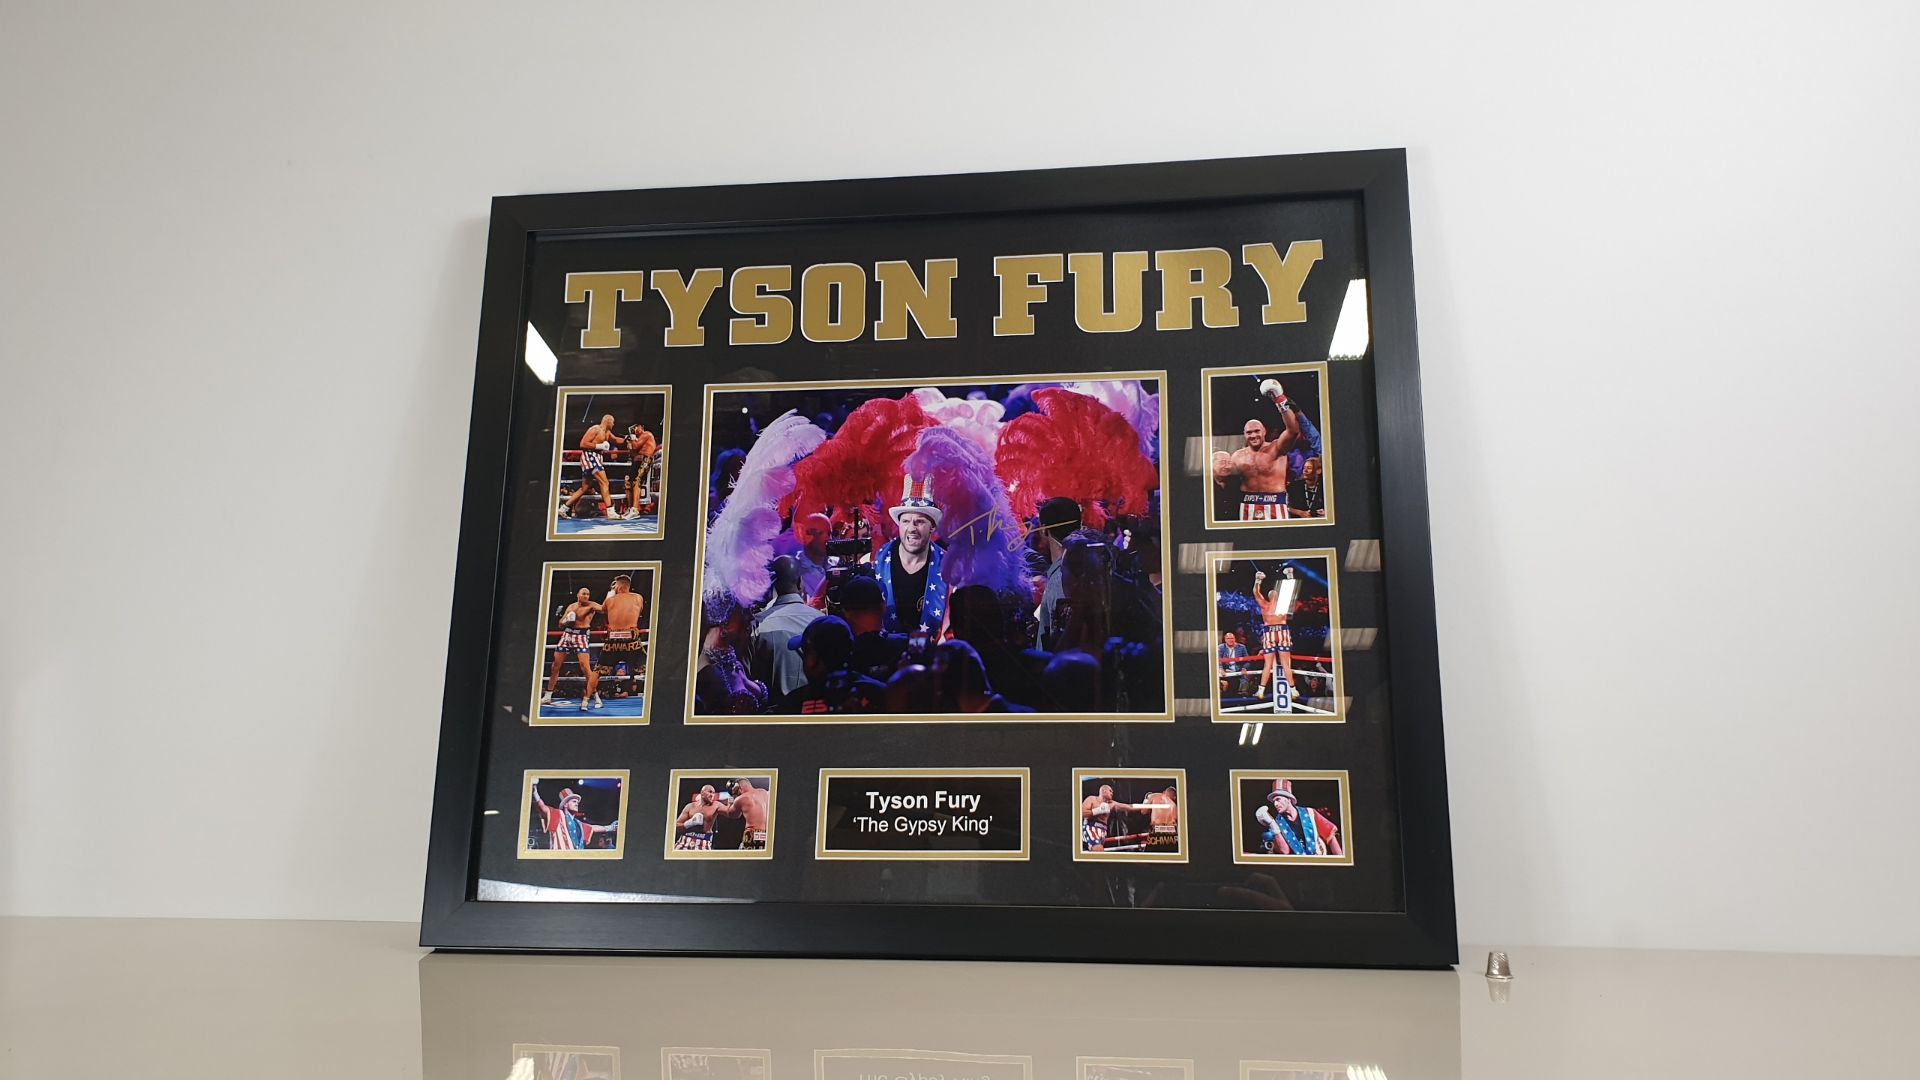 TYSON FURY PERSONALLY SIGNED PICTURE - GOOD CONDITION WITH CERTIFICATE OF AUTHENTICITY